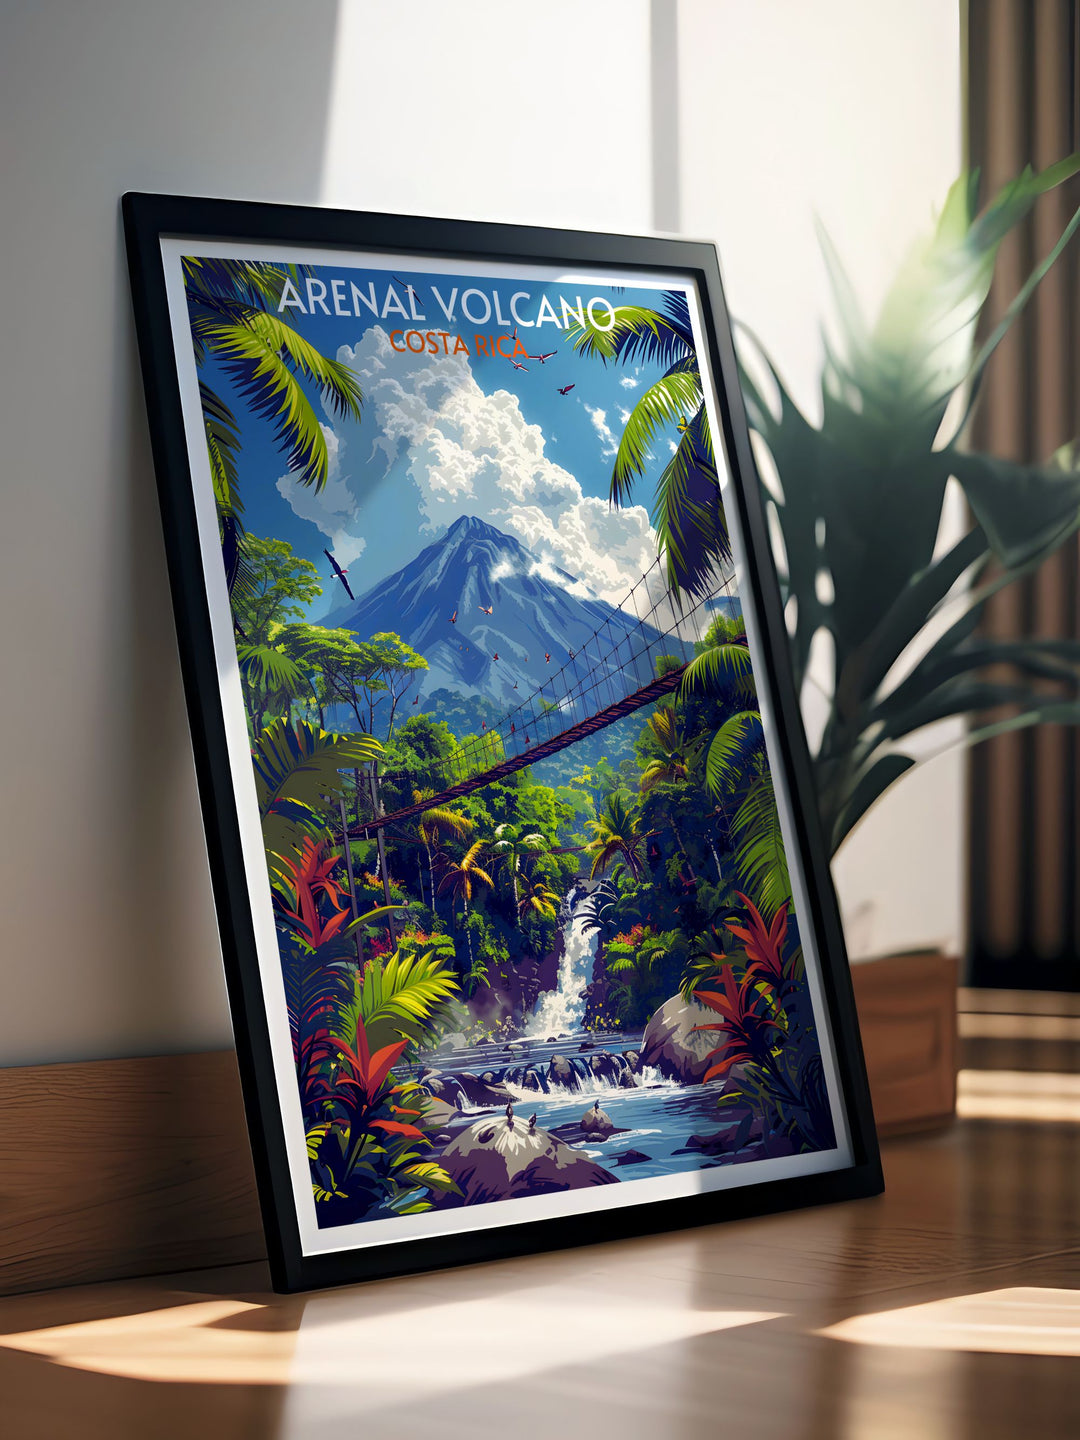 The Arenal Hanging Bridges in an evocative print, highlighting the connection between nature and human ingenuity in Costa Rica.